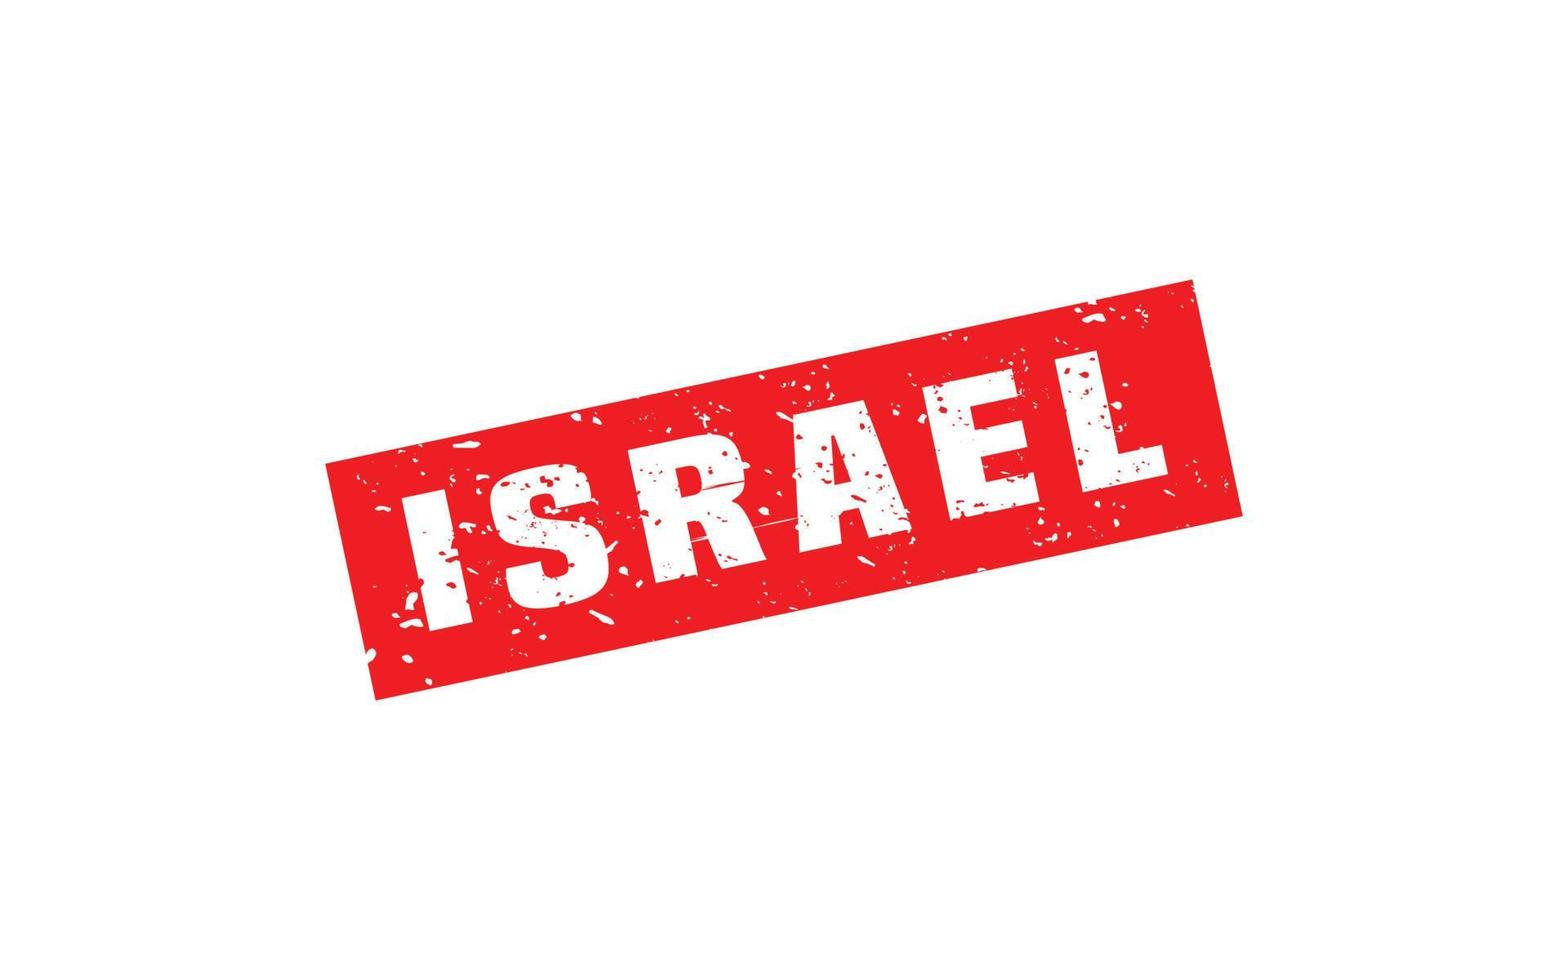 ISRAEL stamp rubber with grunge style on white background vector